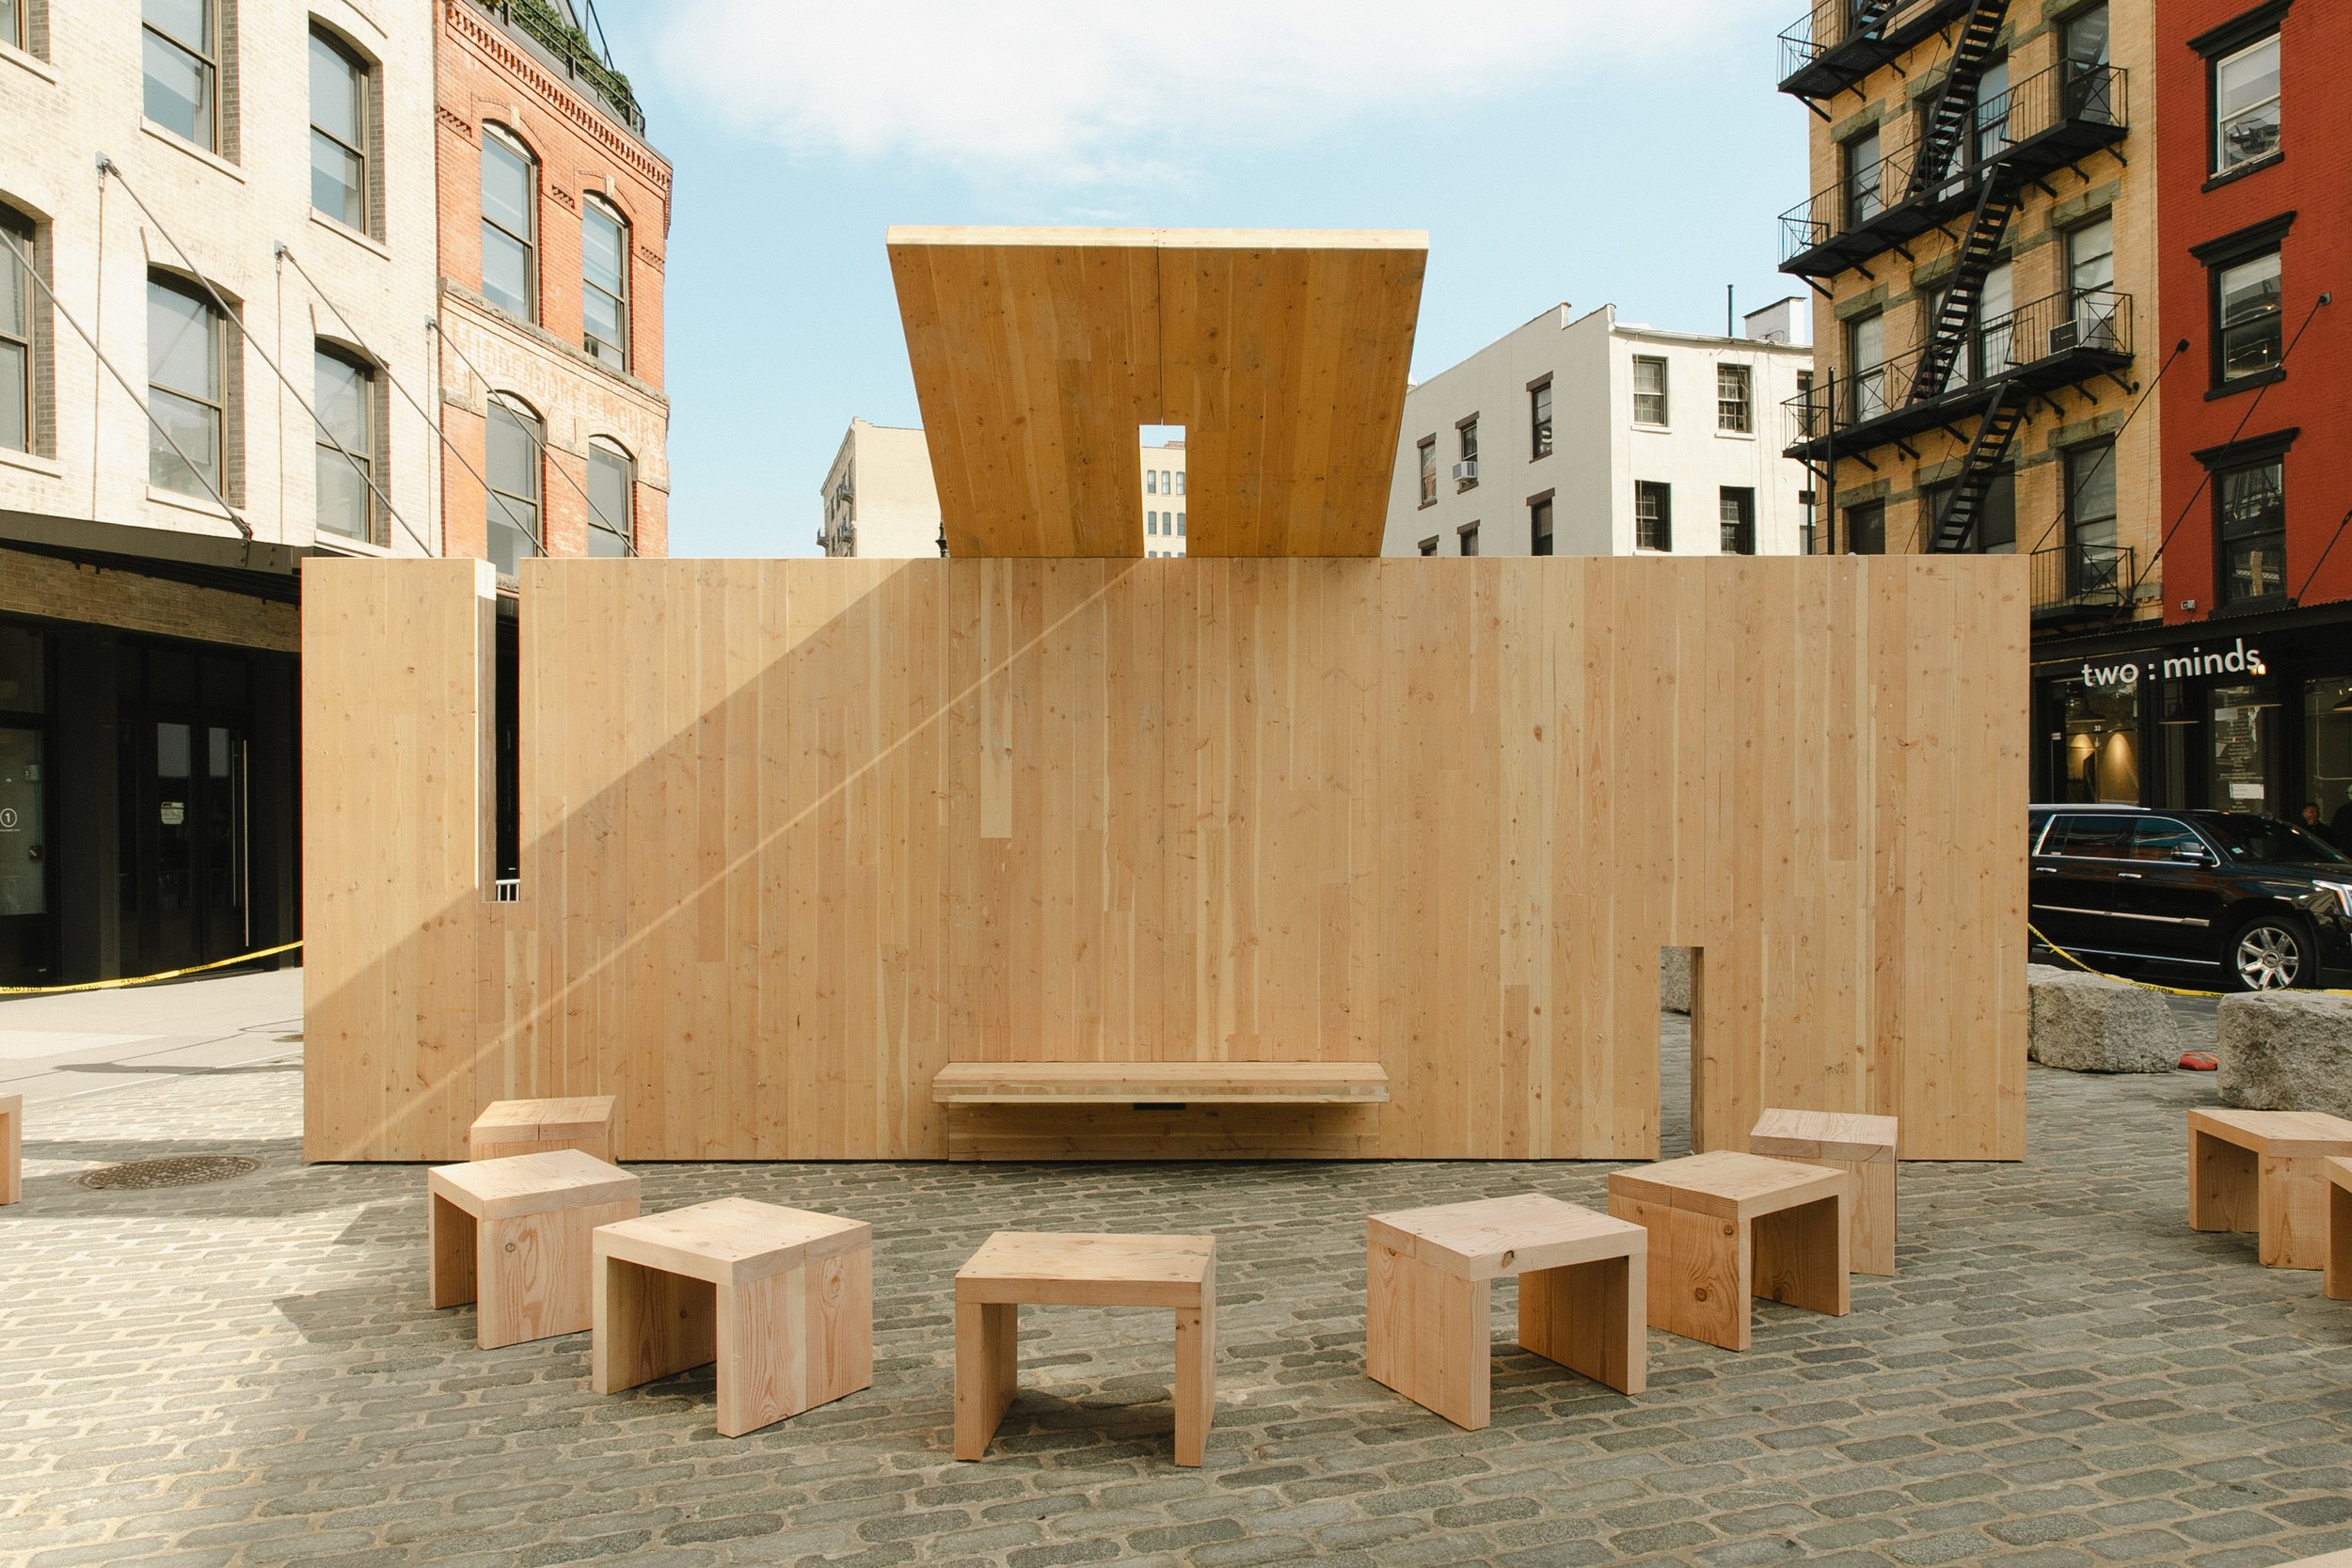  ”Public Spaces” on display in Gansevoort Square in New York City   Photo courtesy Studio Kër by Jennifer Trahan  